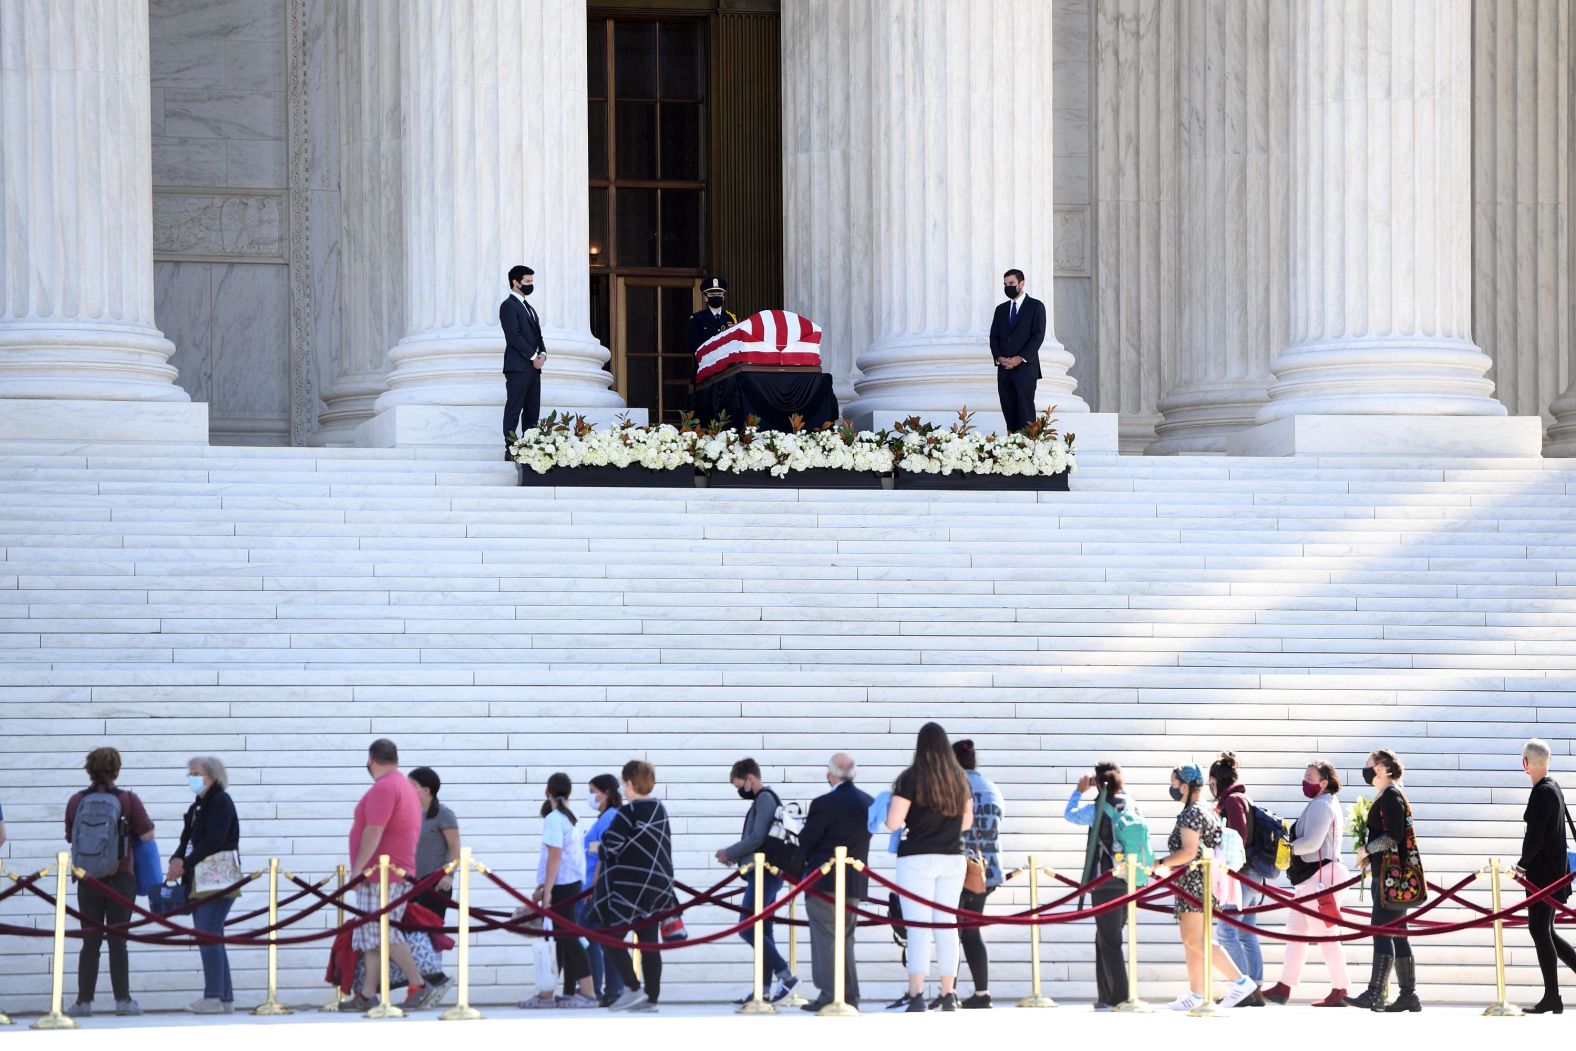 People pay their respects as Ginsburg lies in repose at the top of the Supreme Court steps.